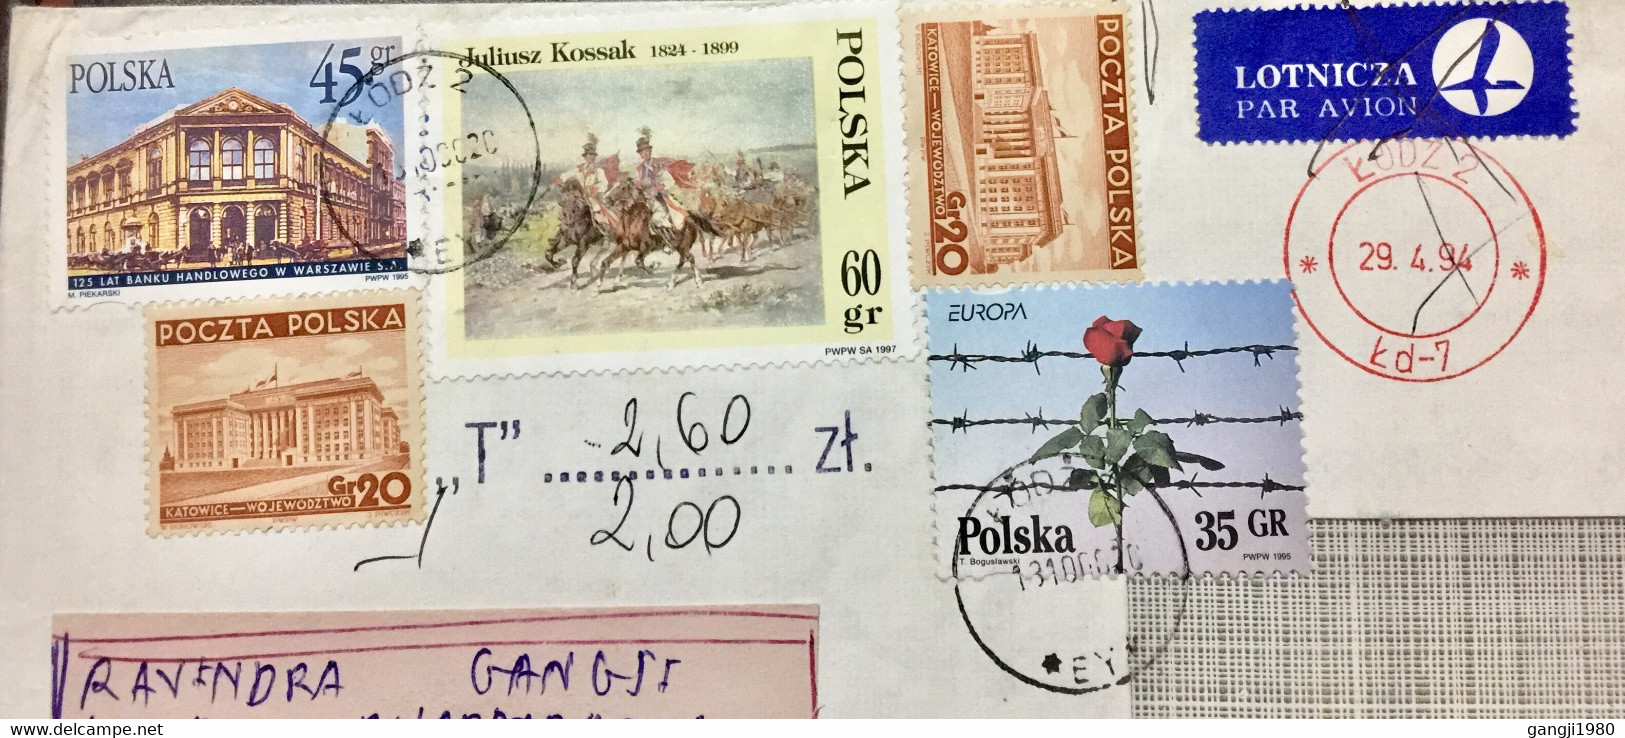 POLAND 2000 ,AIRMAIL METER FRANKED 1994, REUSED COVER EARLY STAMP REJECTED SU DUE “T” 260 ZT, BUILDING,HORSE,FLOWER,PLAN - Lettres & Documents